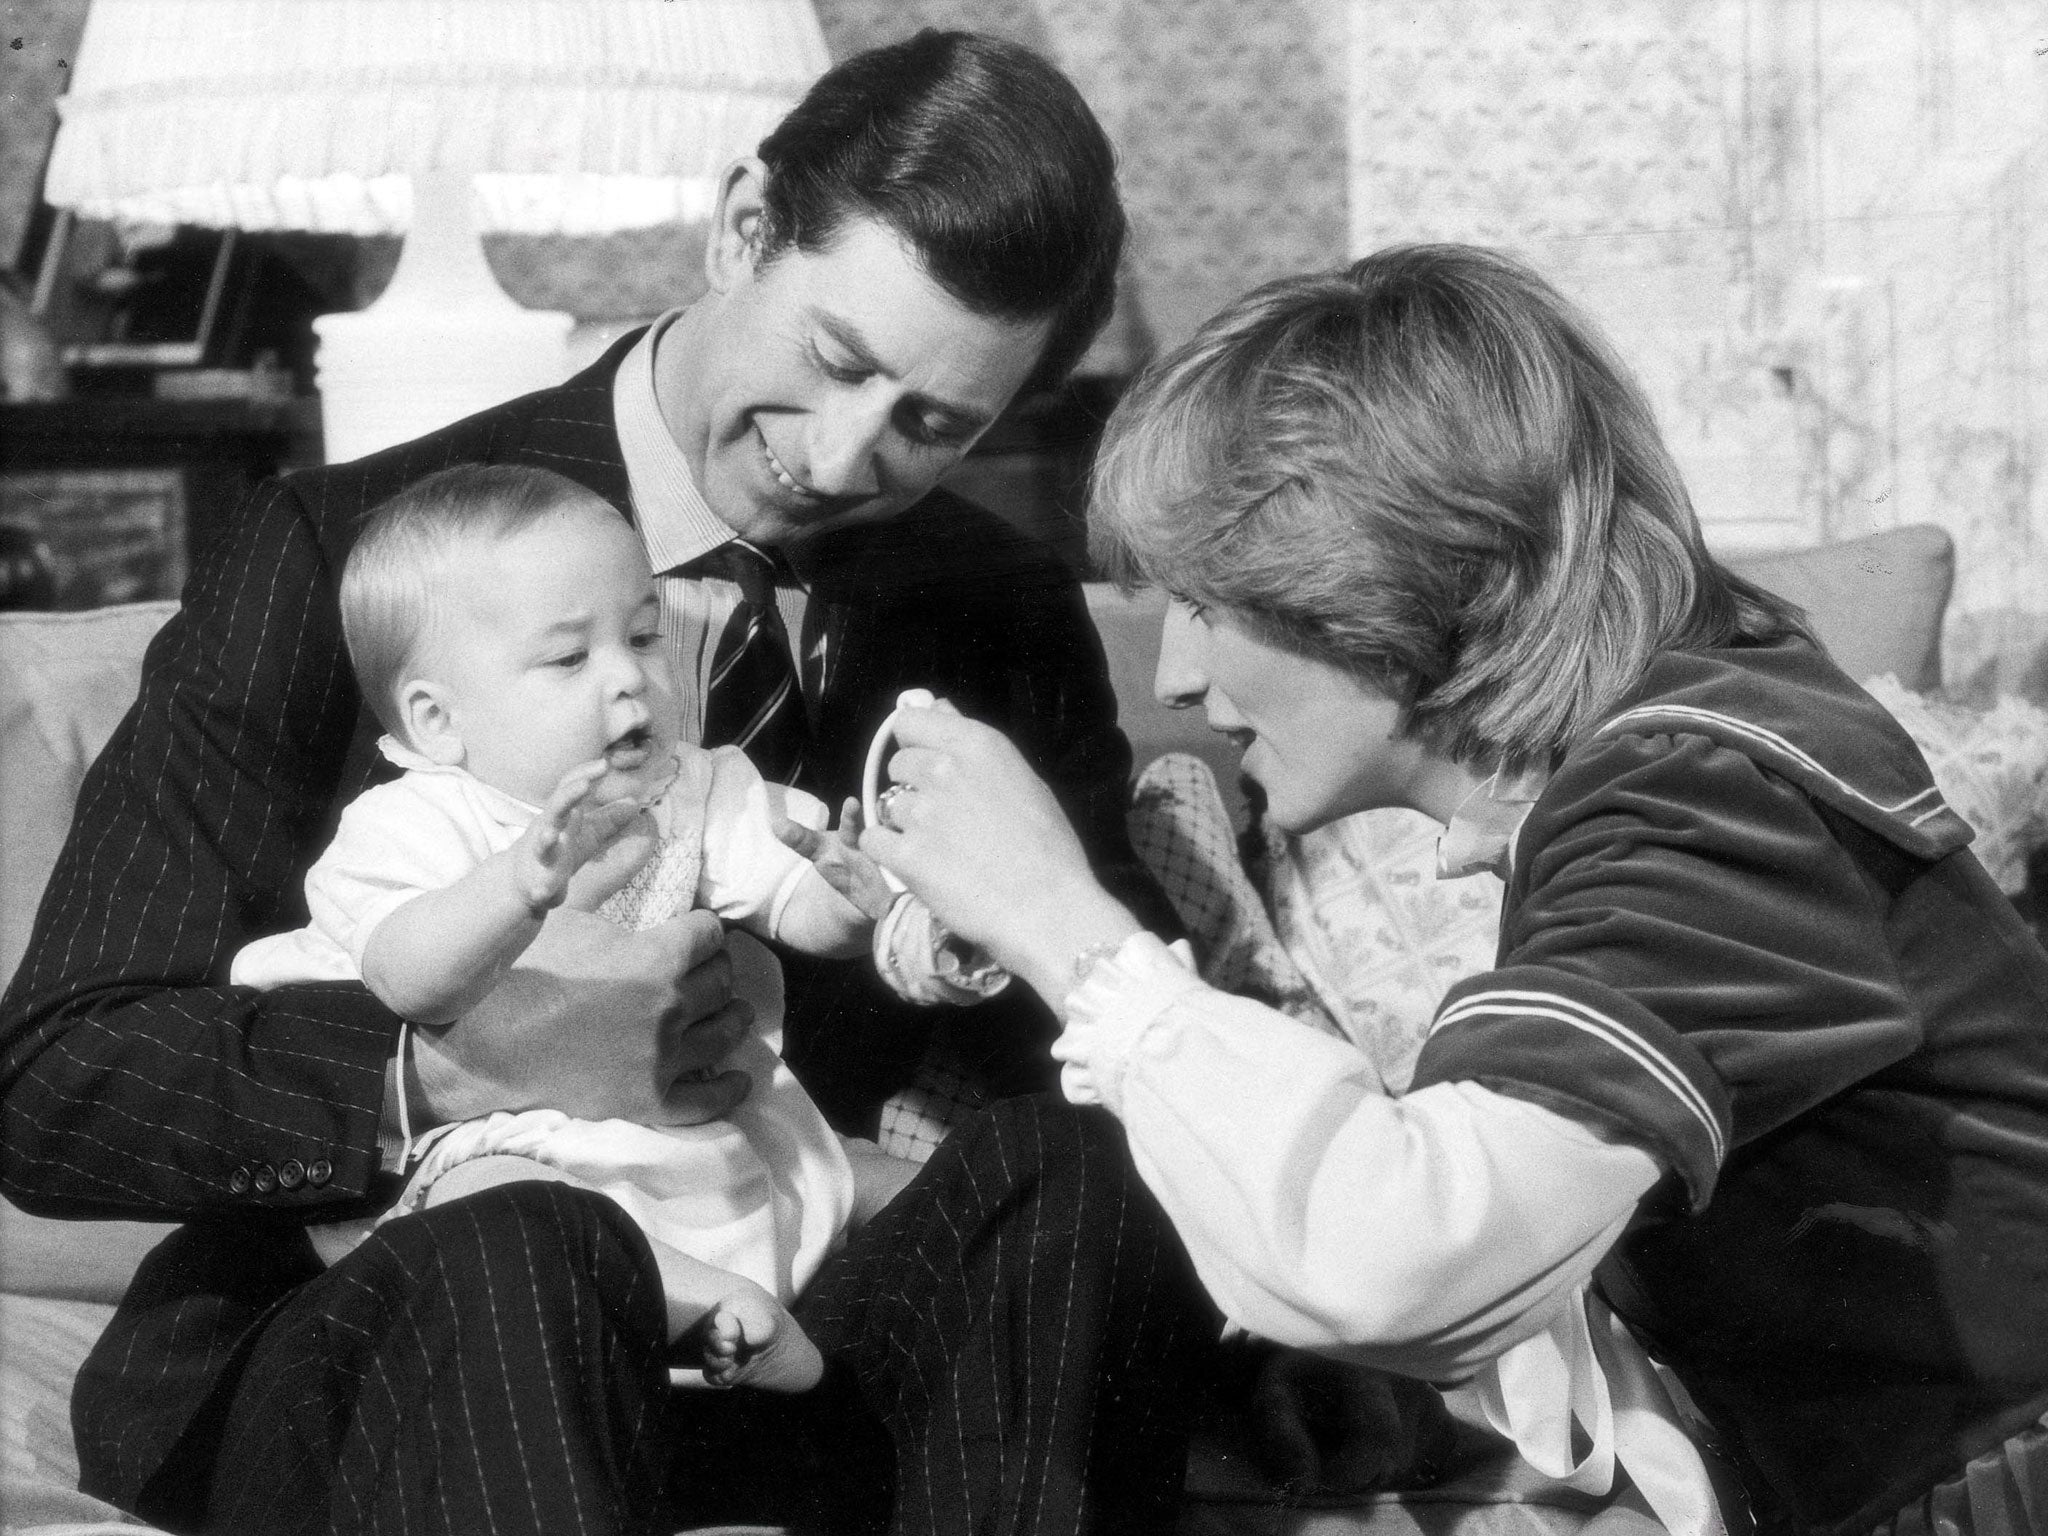 William, in 1982, photographed with his mother and father at Kensington Palace